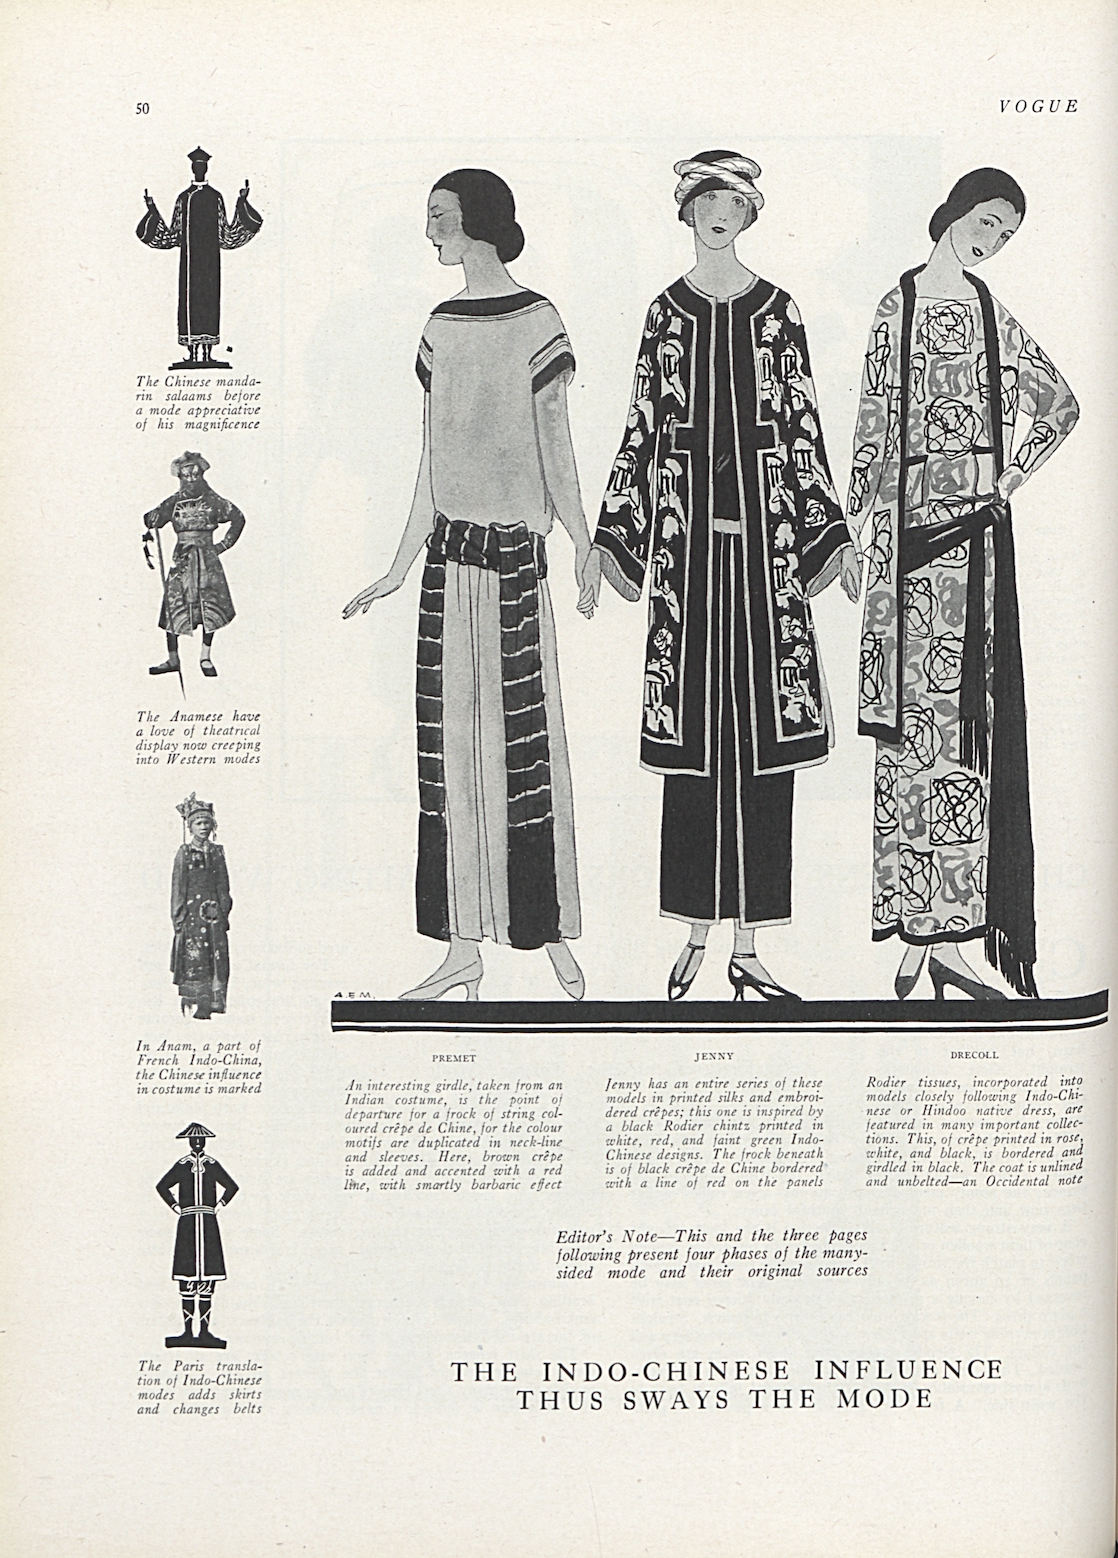 Three large fashion illustrations in the center wearing fashion inspired by Eastern cultures. Four smaller figures on the ledt margins show the orginal source of inspiration, 1923.